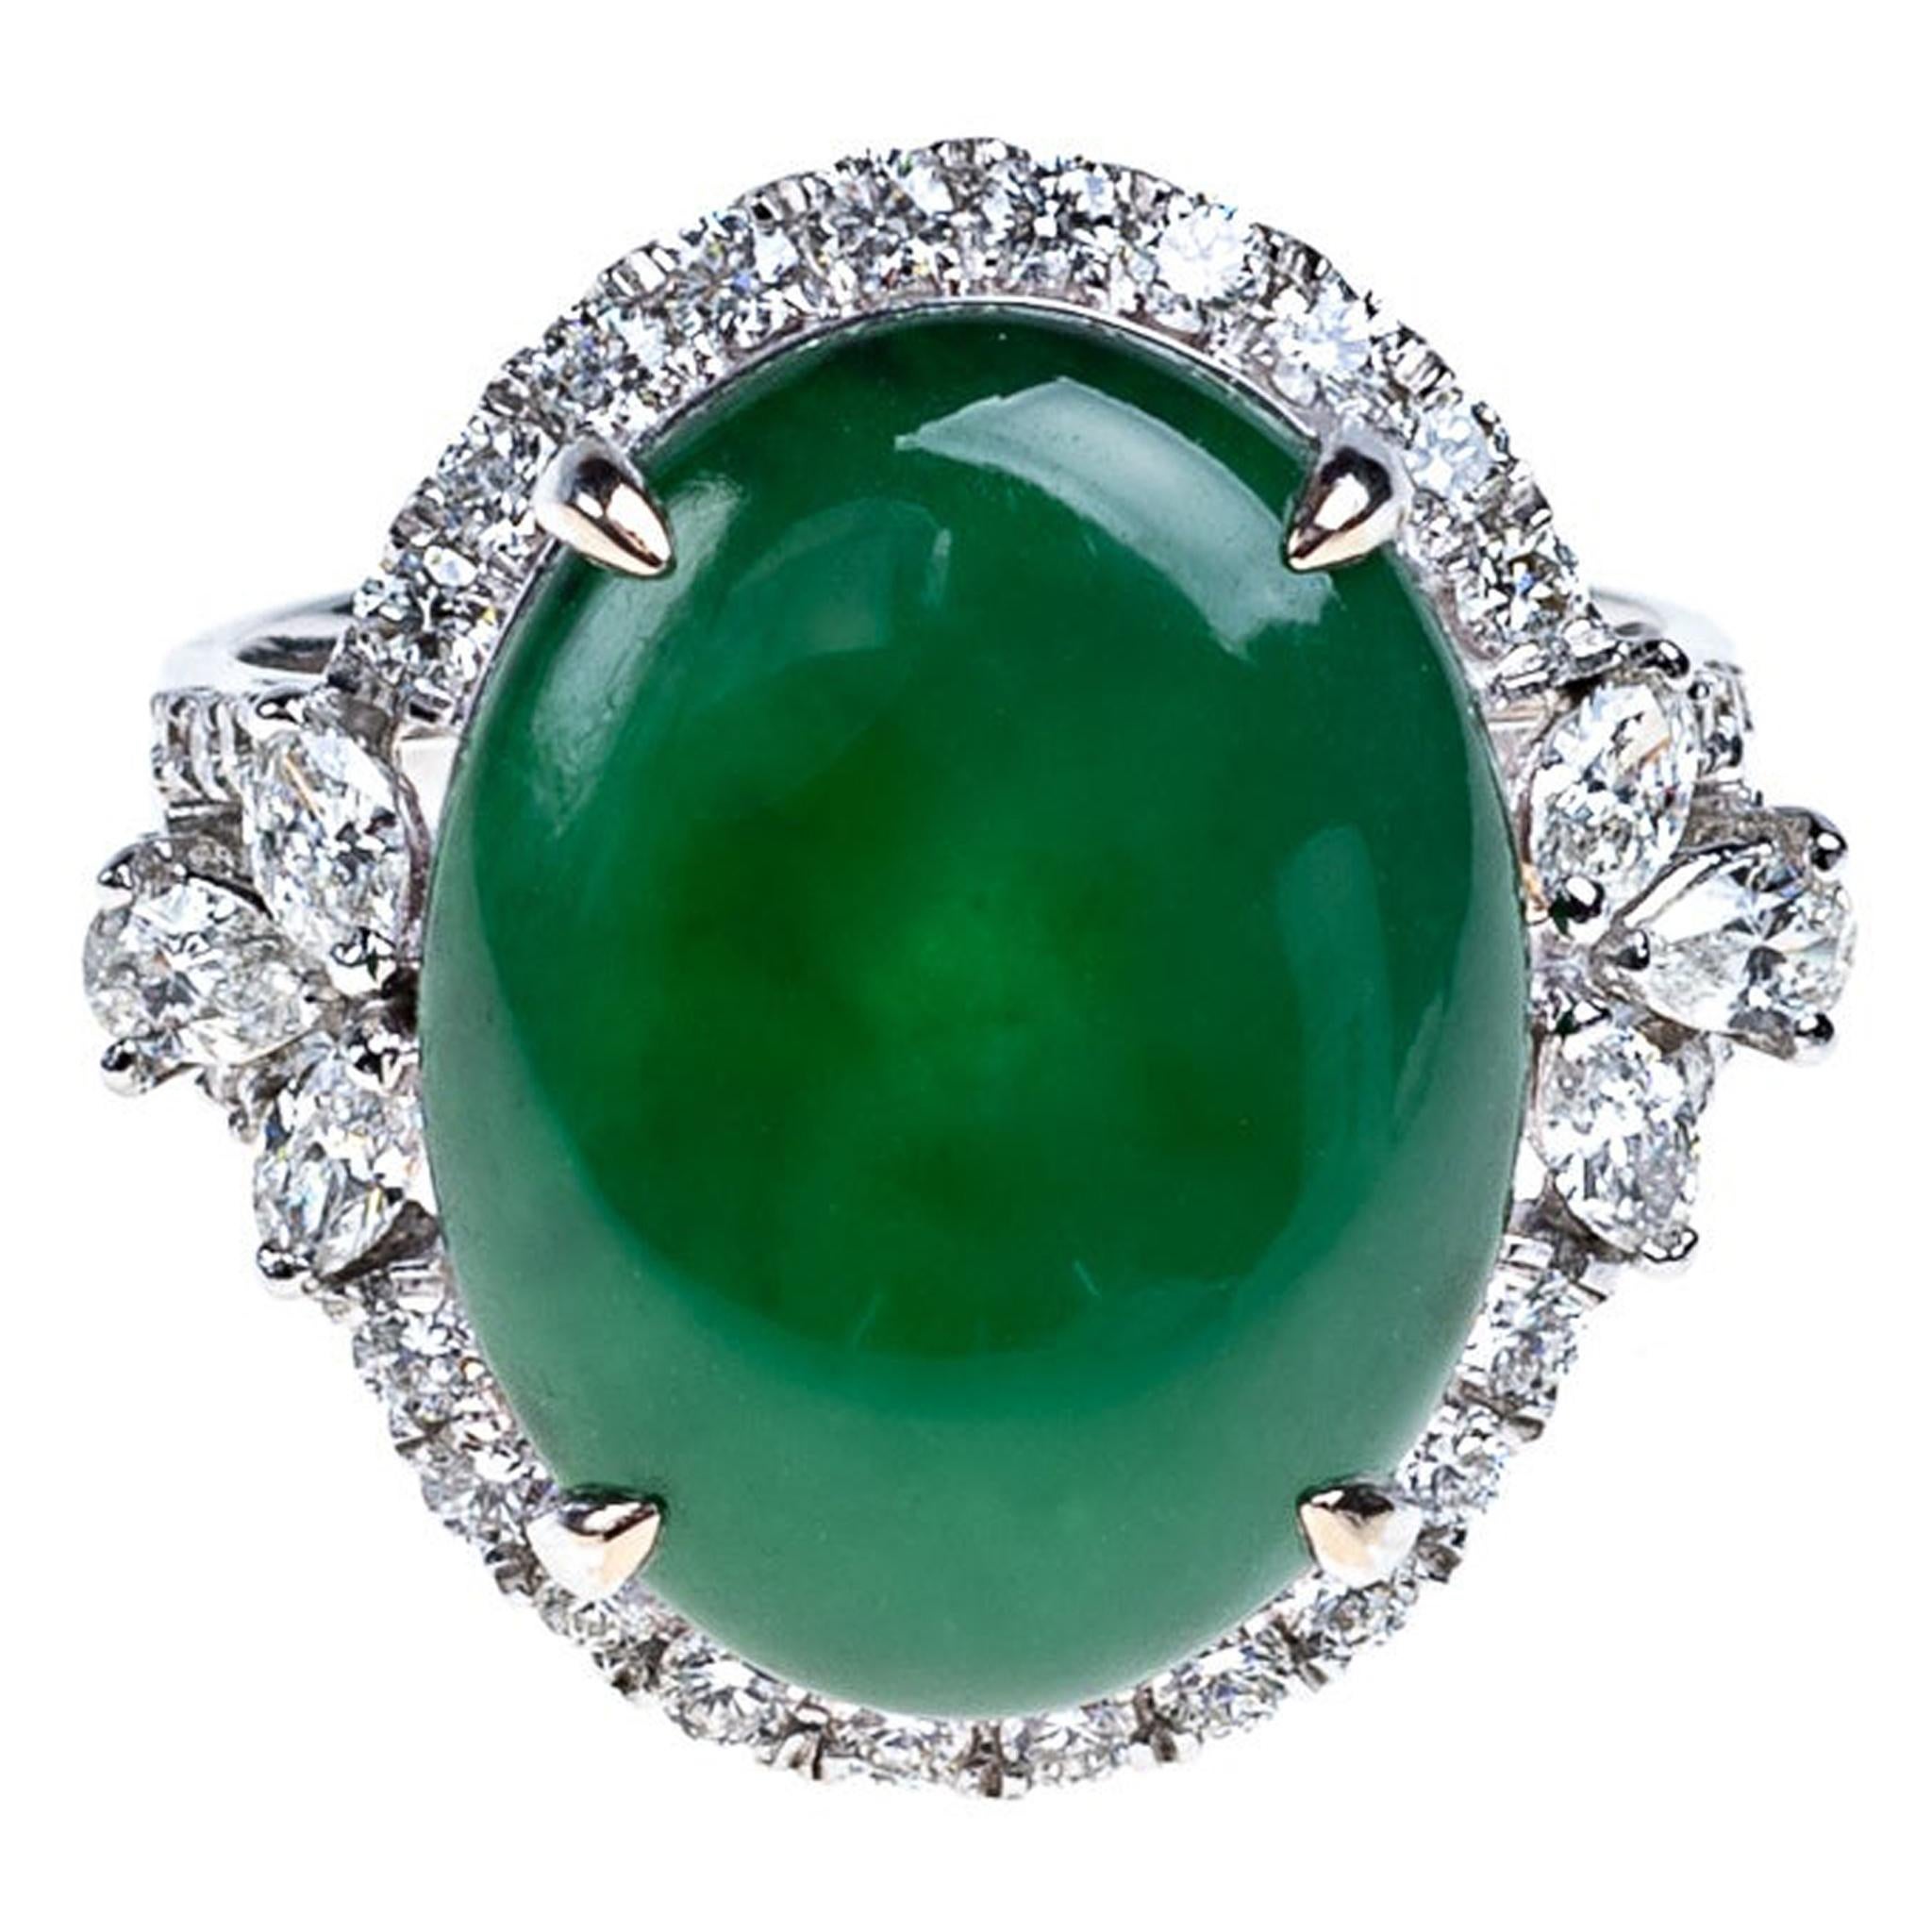 Imperial Green Jadeite Jade Cabochon and Halo Diamond Ring, Certified Untreated